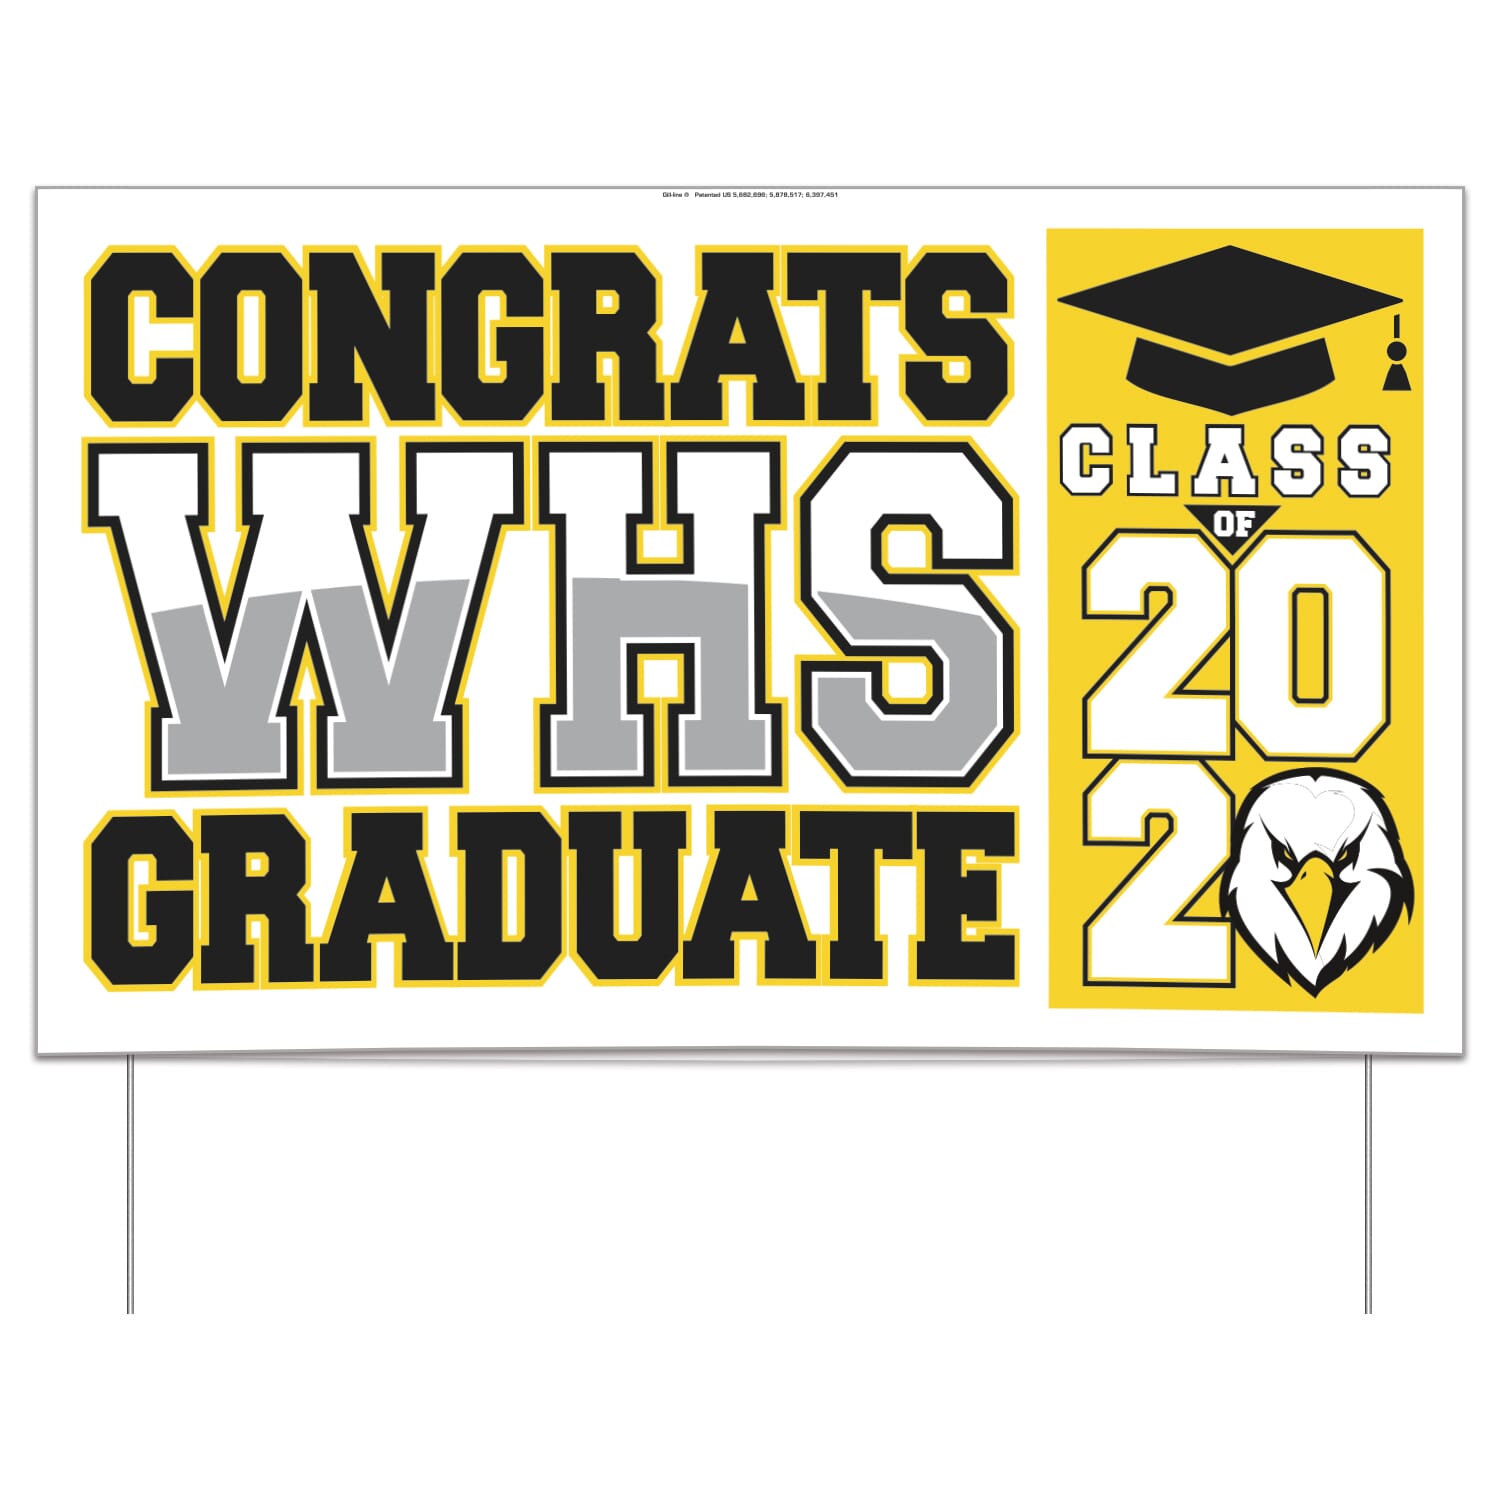 Double-sided graduation lawn sign